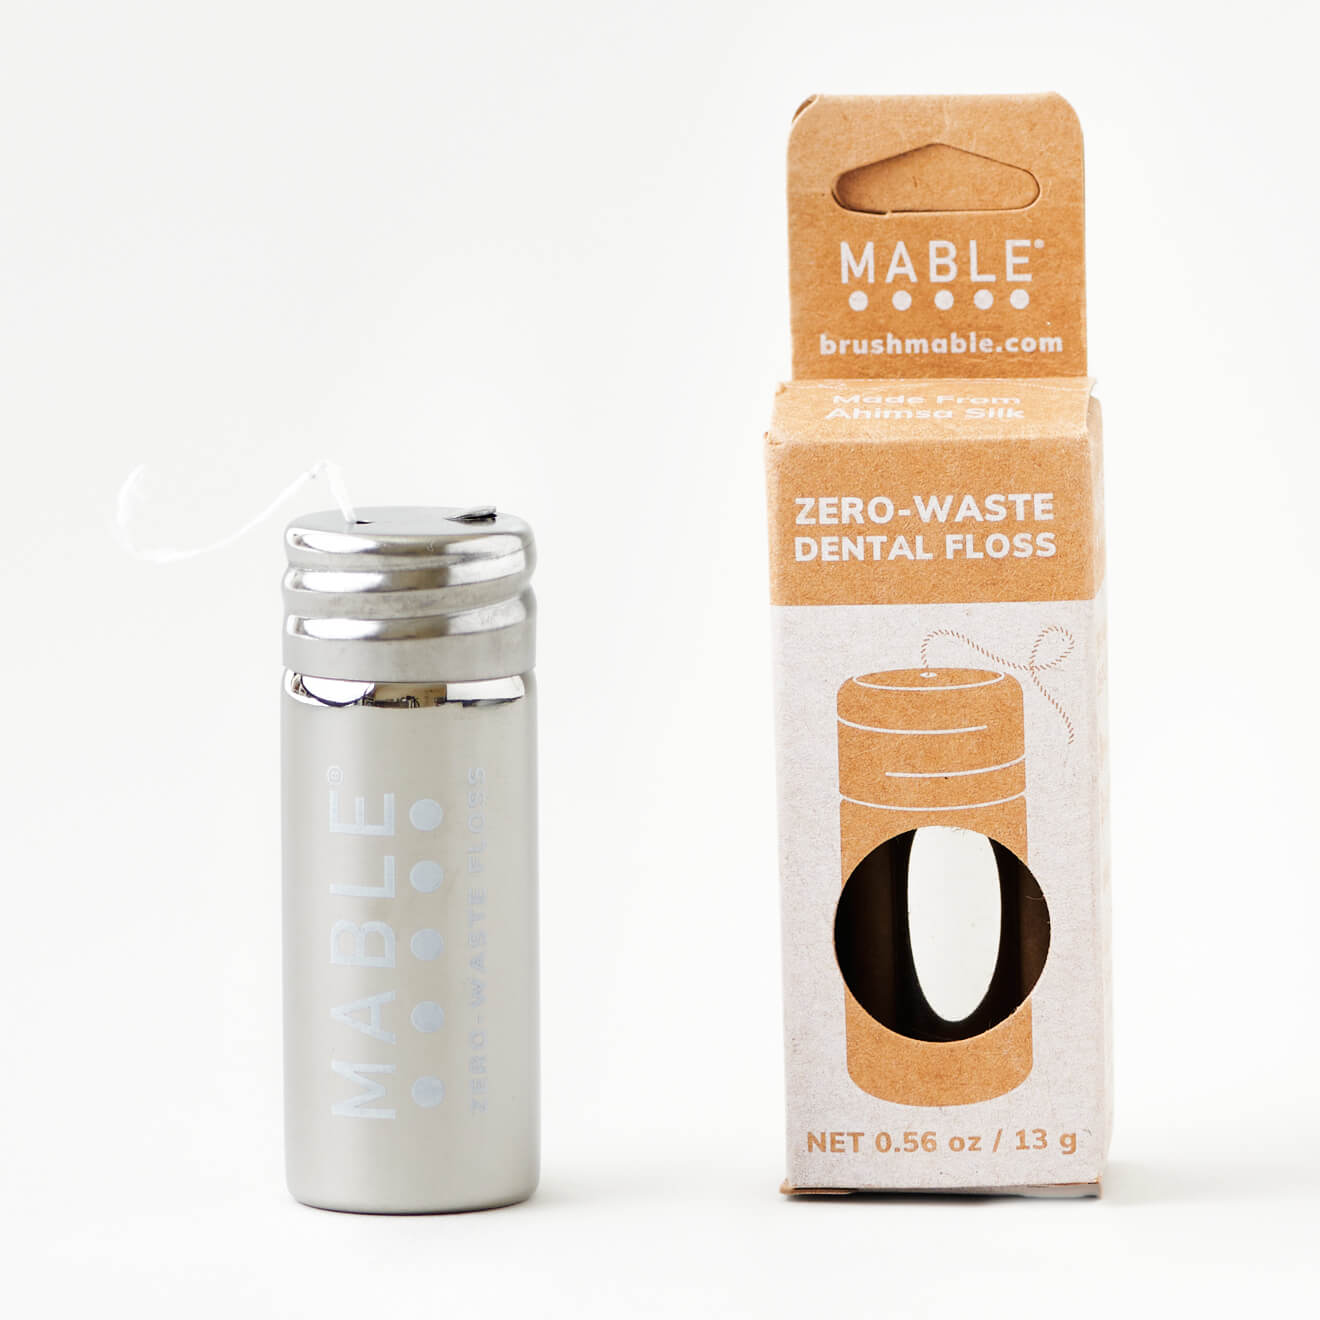 Mable Silk Dental Floss in Stainless Steel, Refillable Container.